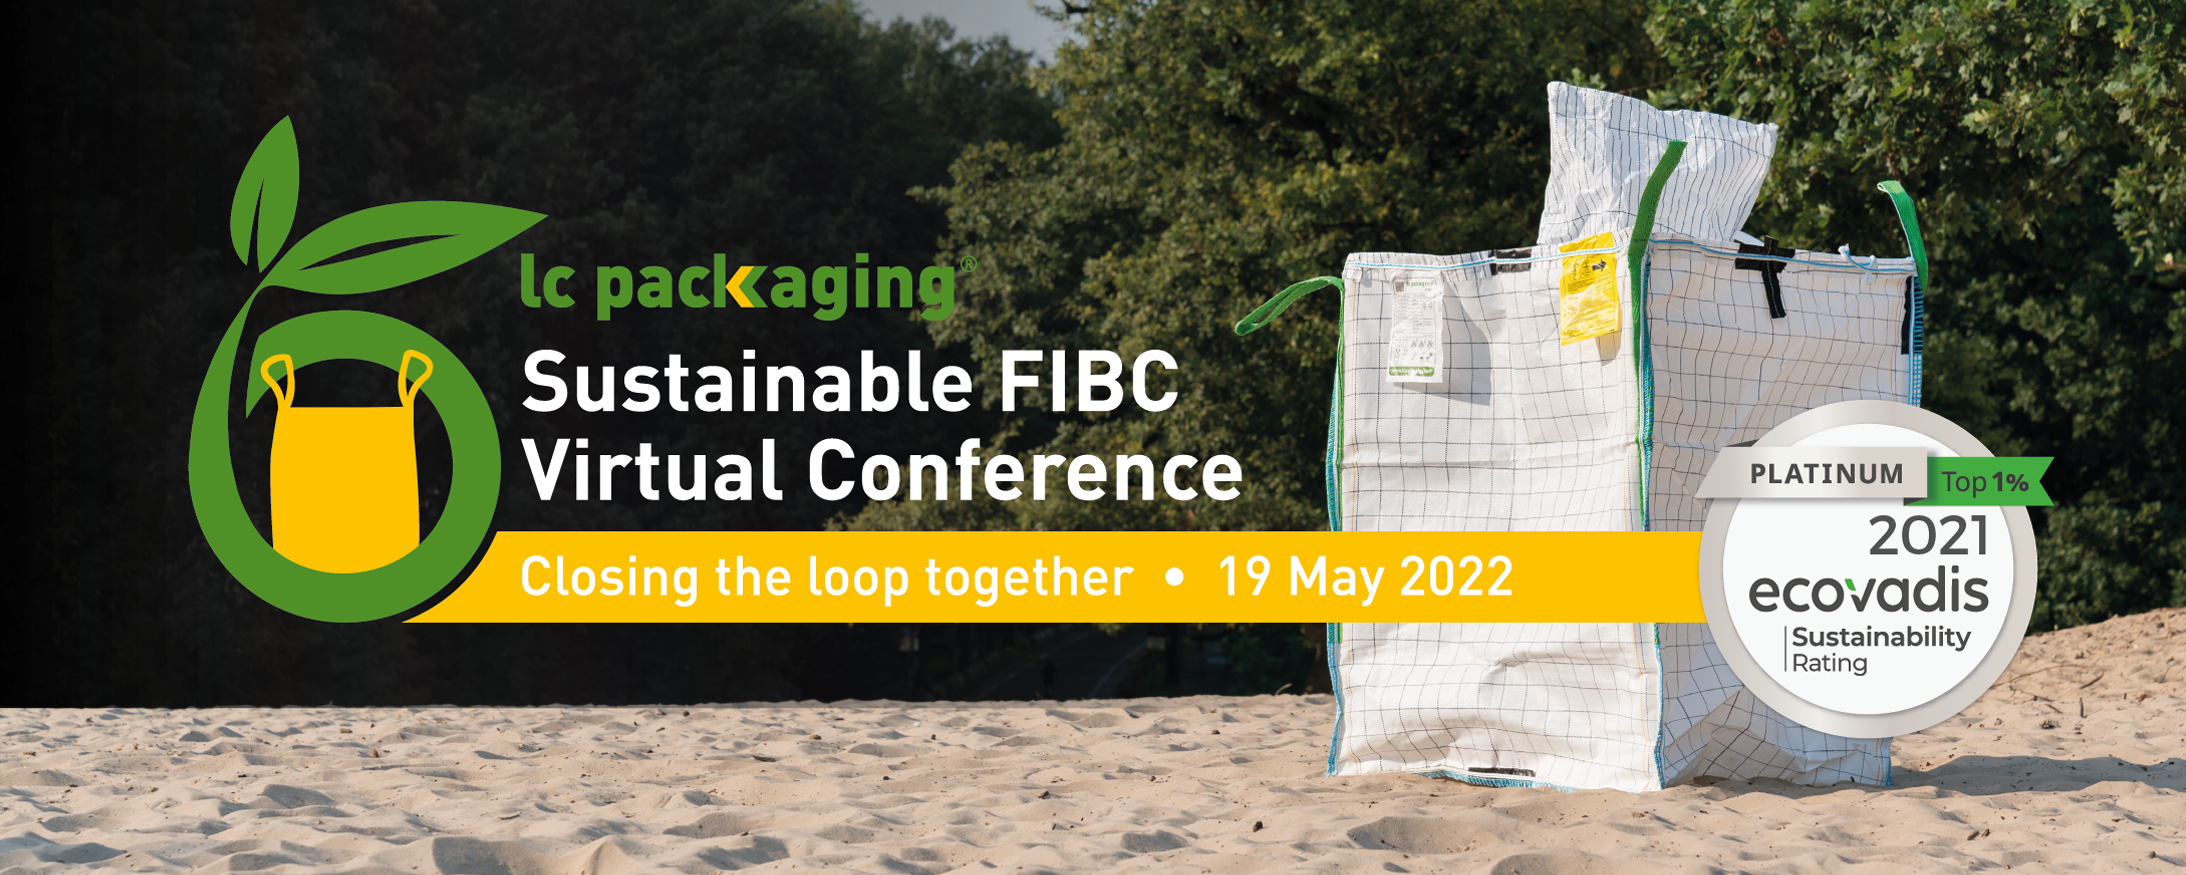 BANNER Virtual Sustainable FIBC Conference 2022 - big.png